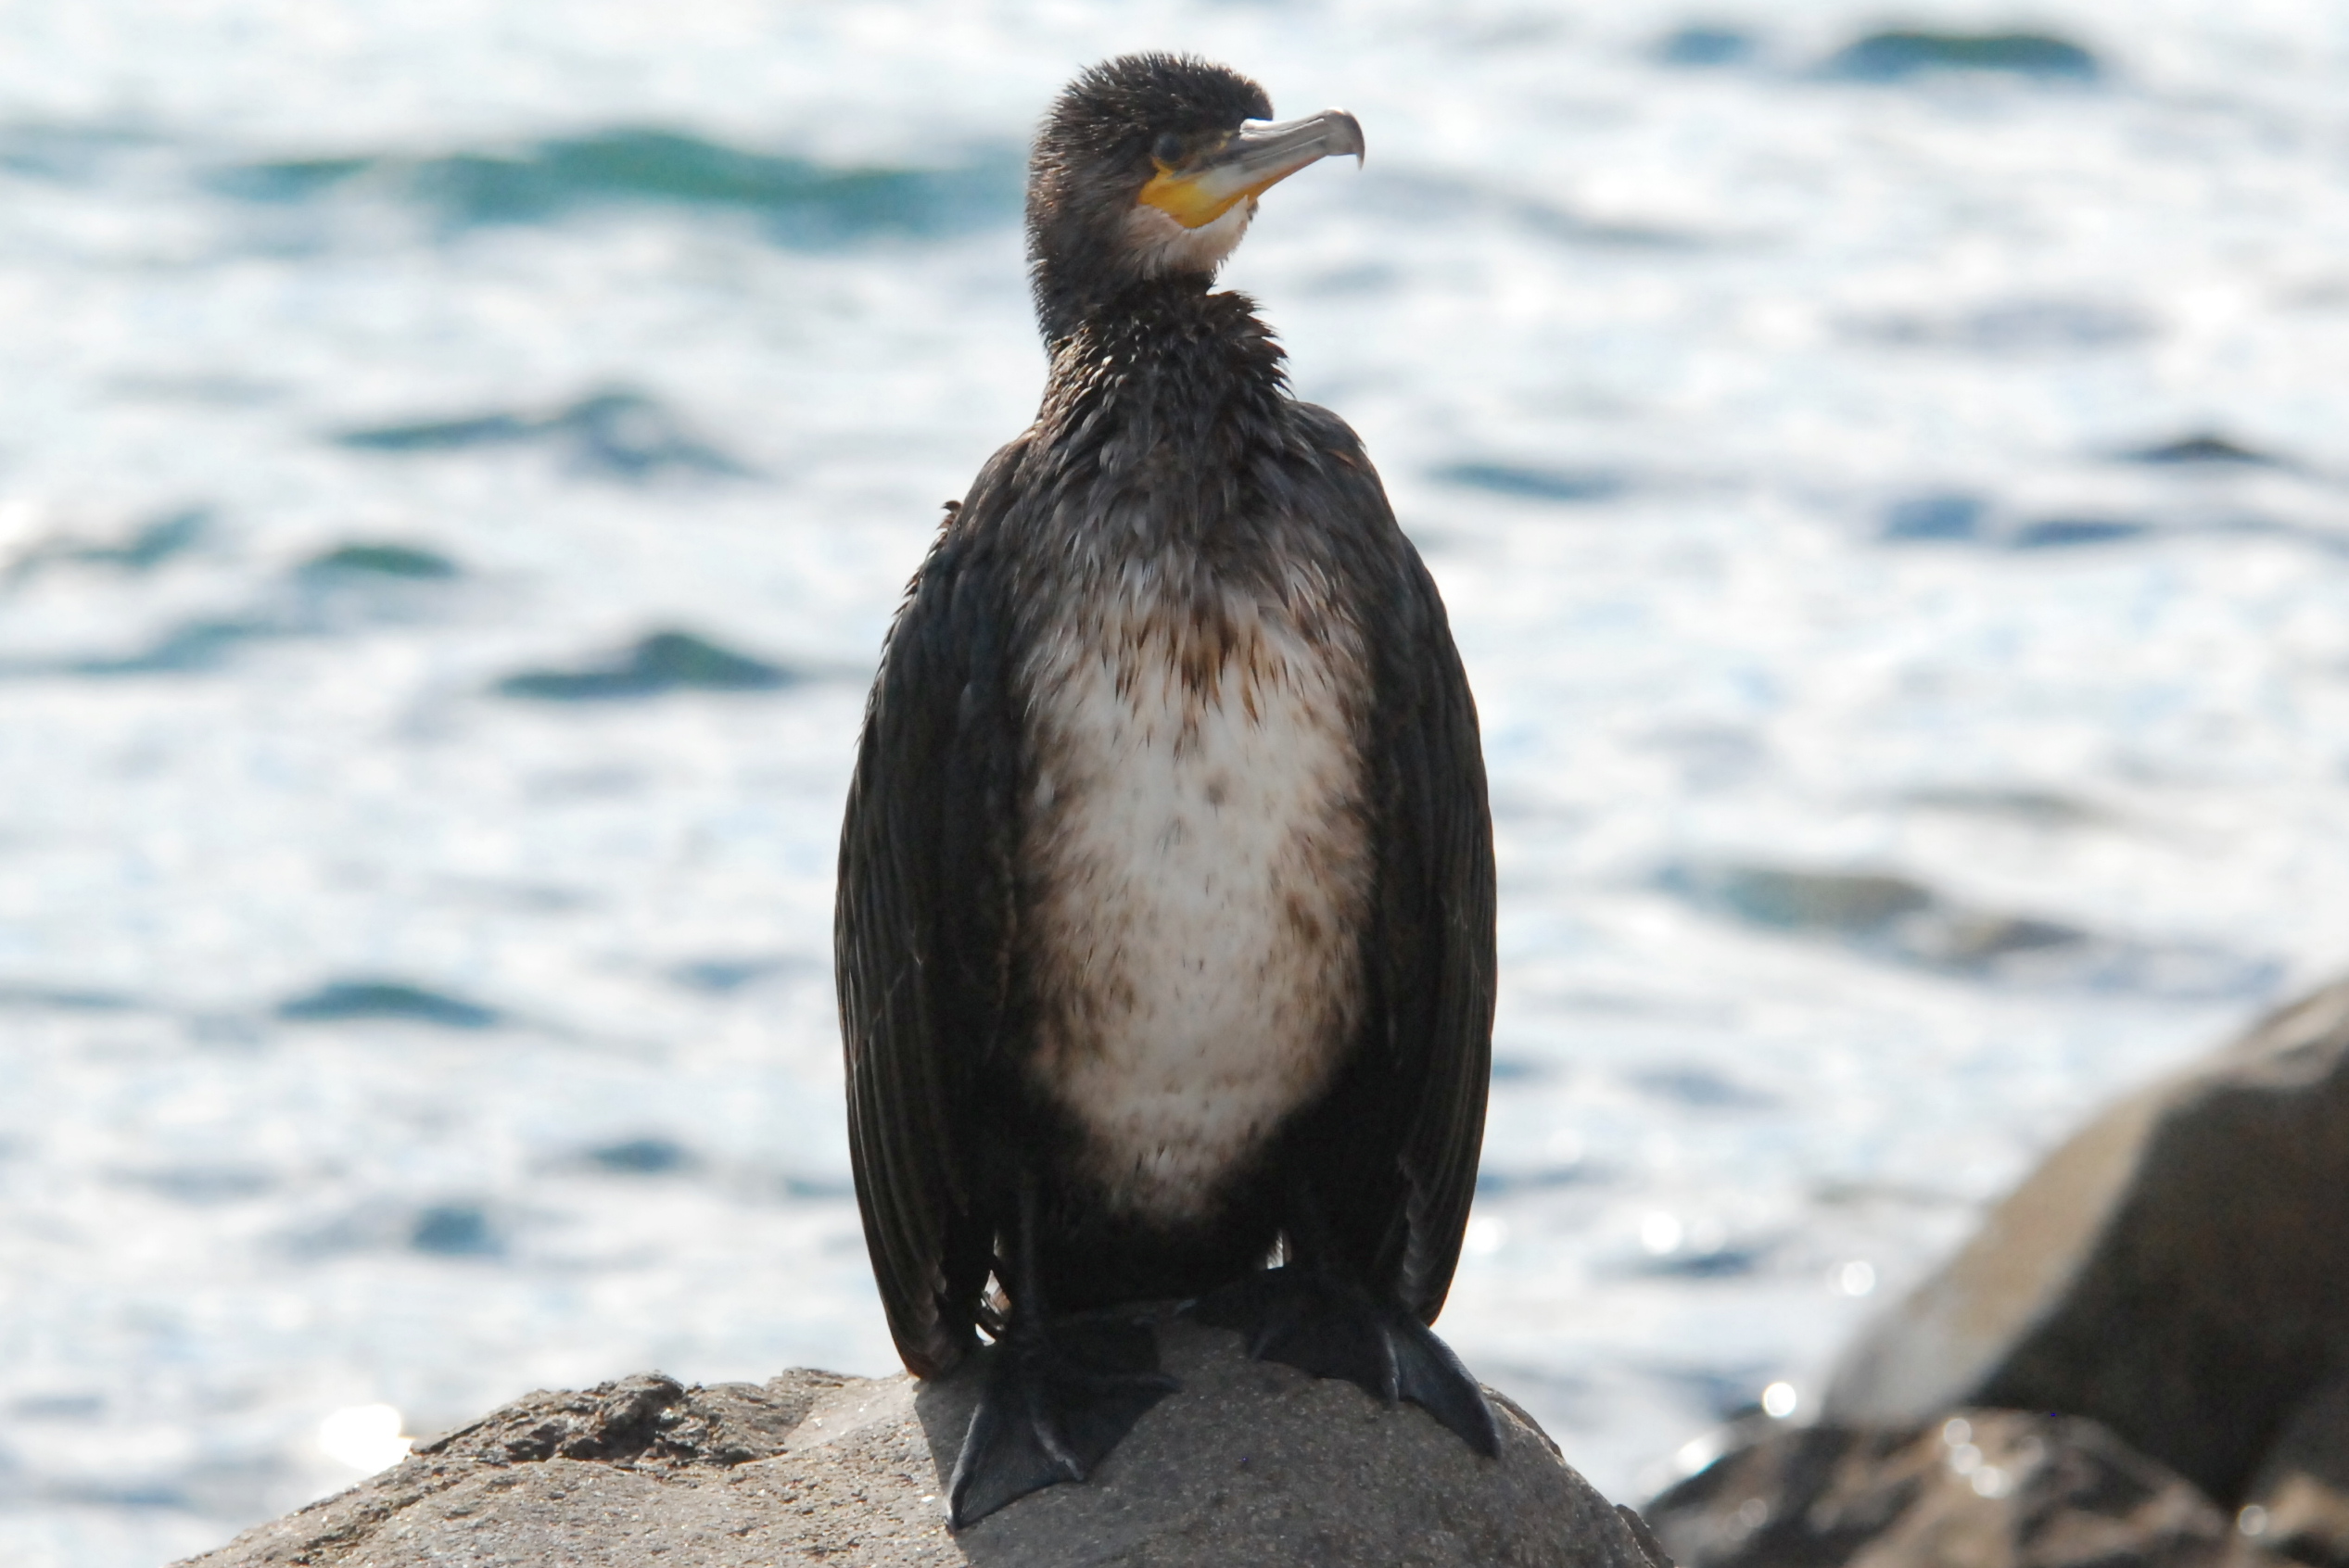 Click picture to see more GreatCormorants.